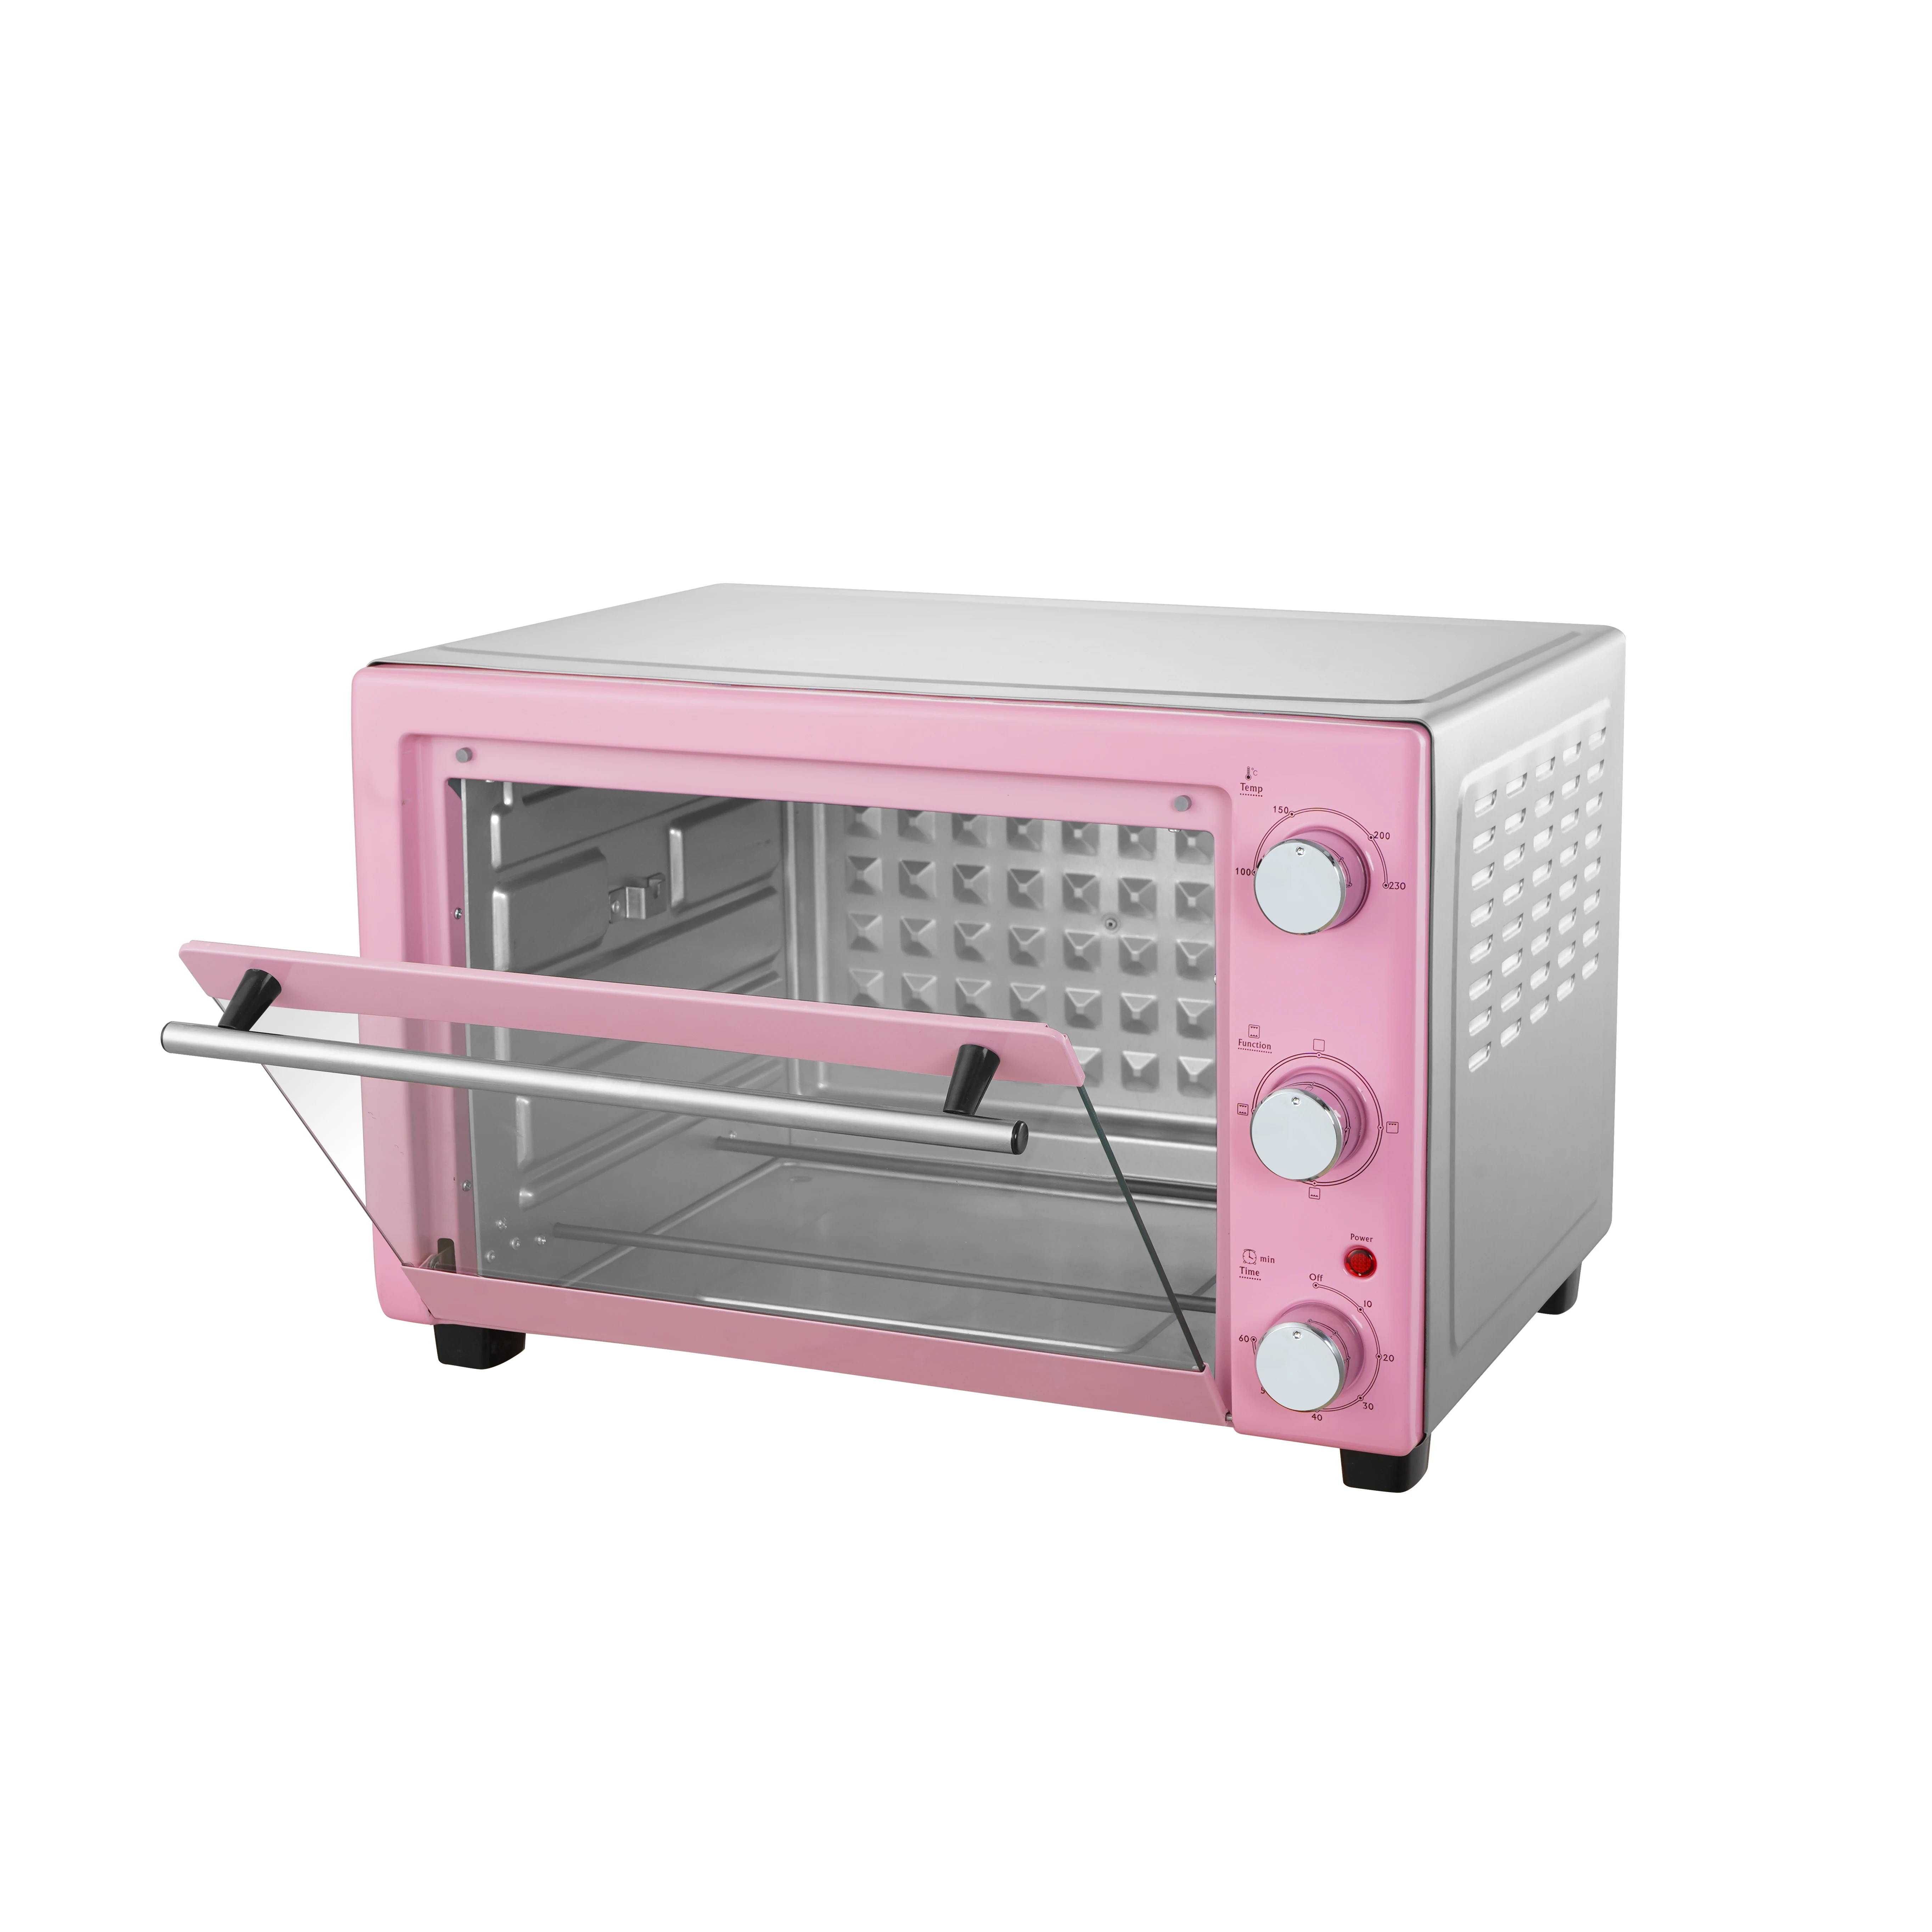  SUSOSU Microwave Oven 15L Electric Oven Household Baking Small  Mini Oven Multifunctional Baking Oven with 60min Timing Adjustable  Temperature 1200W (Color : Pink) : Home & Kitchen